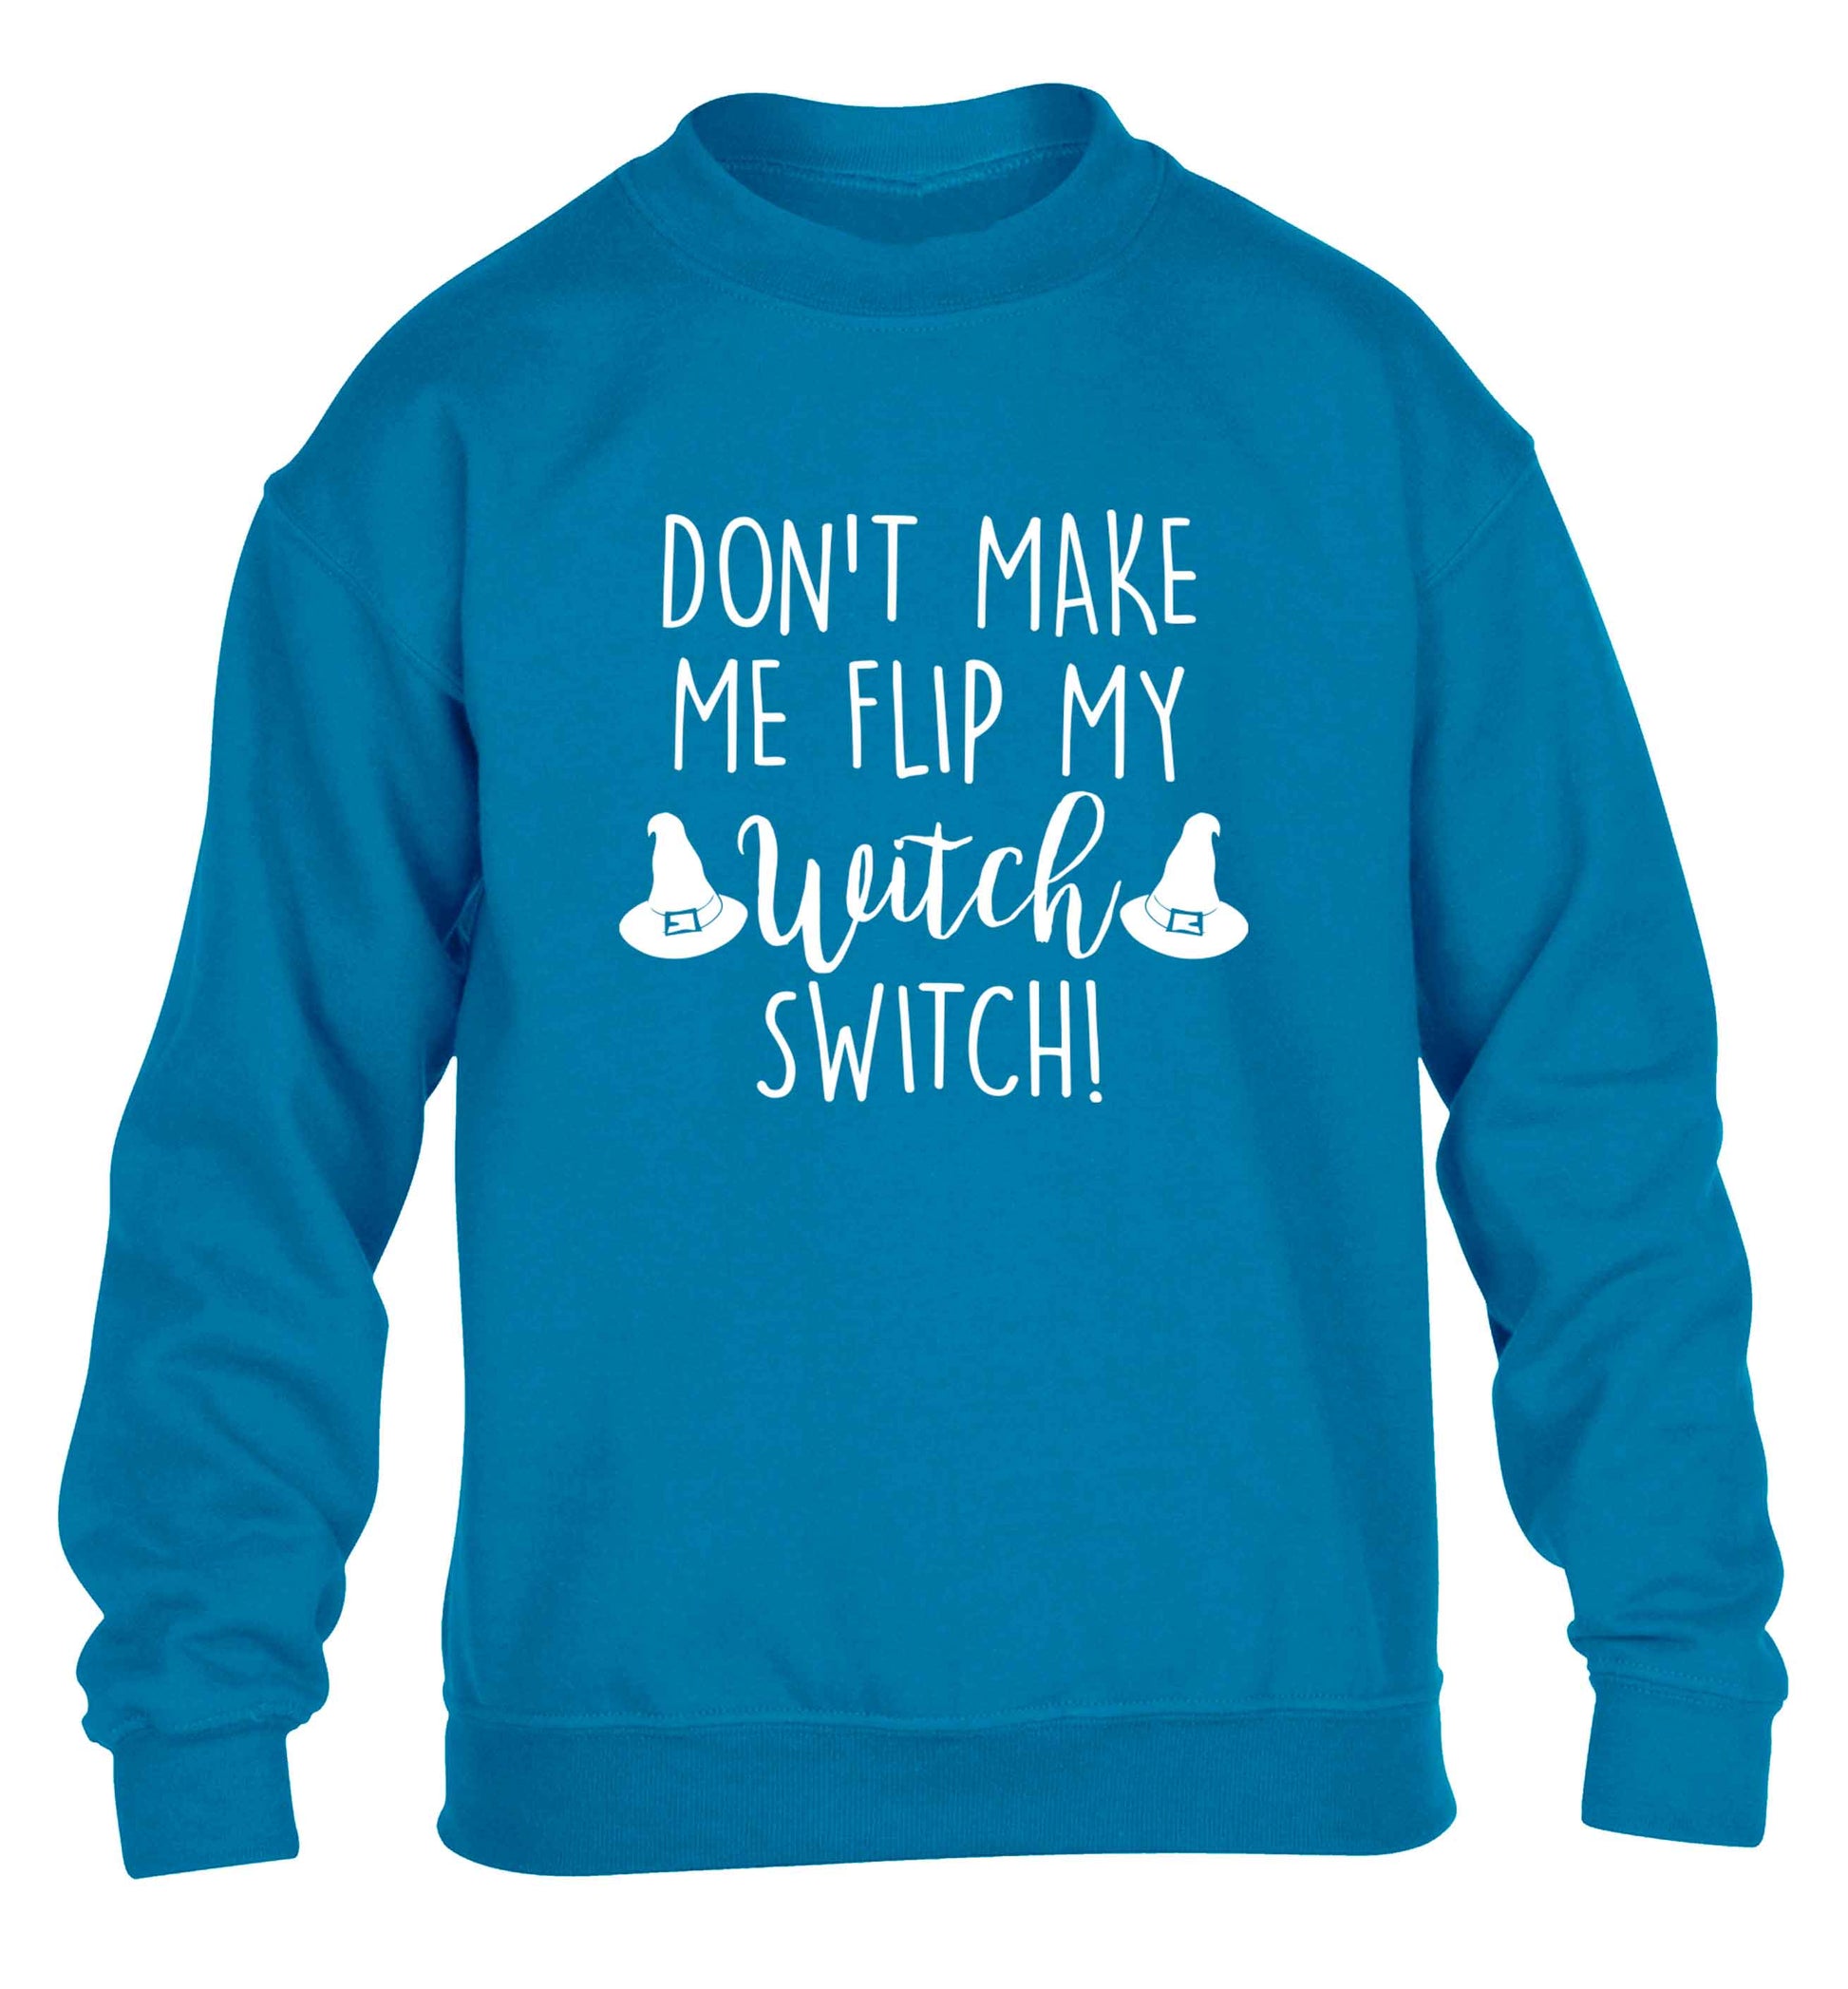 Don't make me flip my witch switch children's blue sweater 12-13 Years